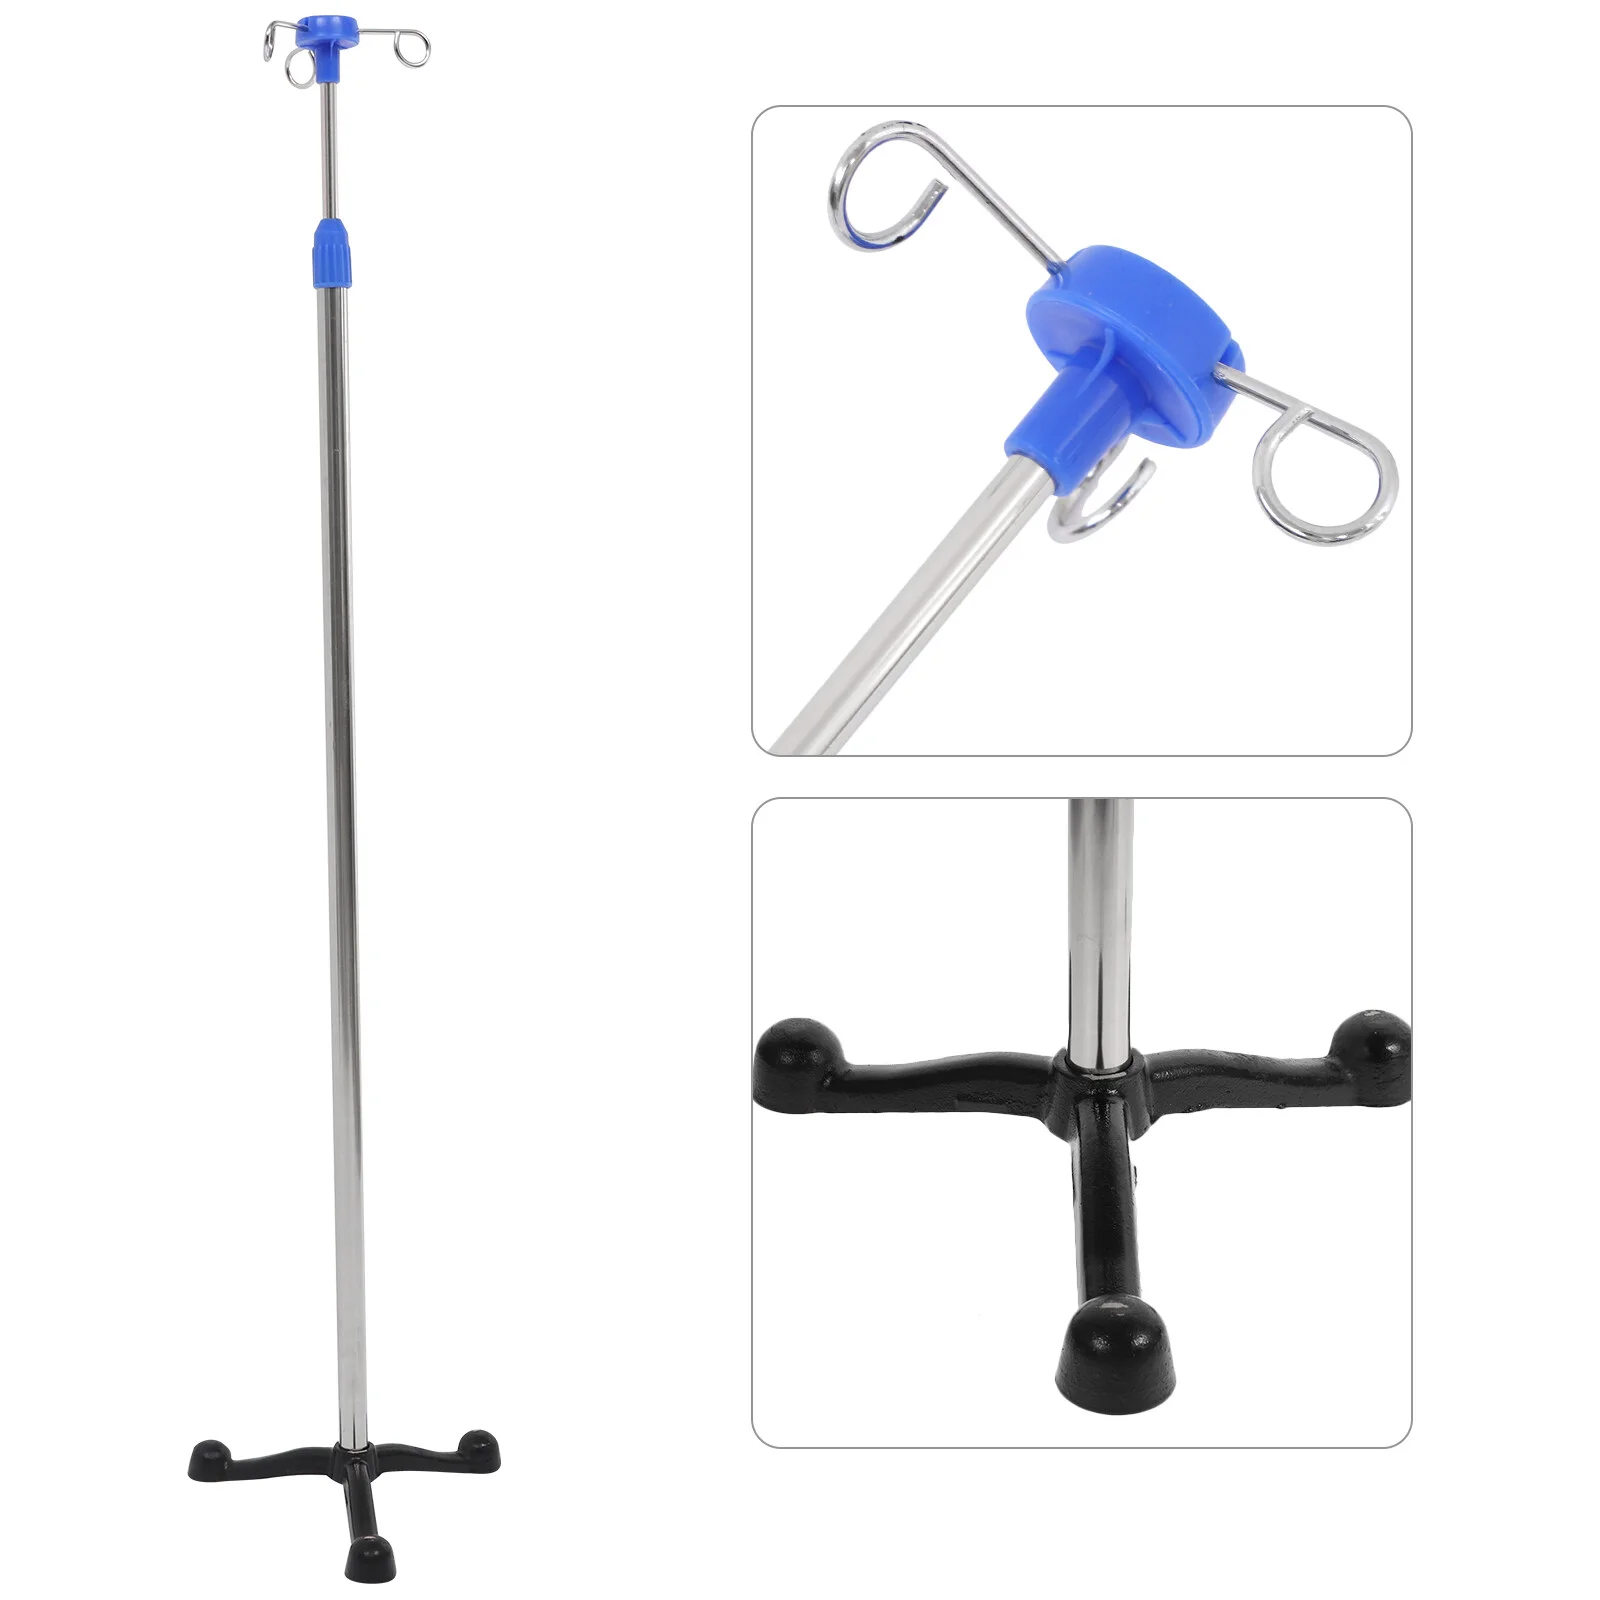 

IV Stand Stainless Steel Drip Bag Holder Durable Rod Portable Infusion Clothes Hanger Rack Adjustable Cast Iron Base